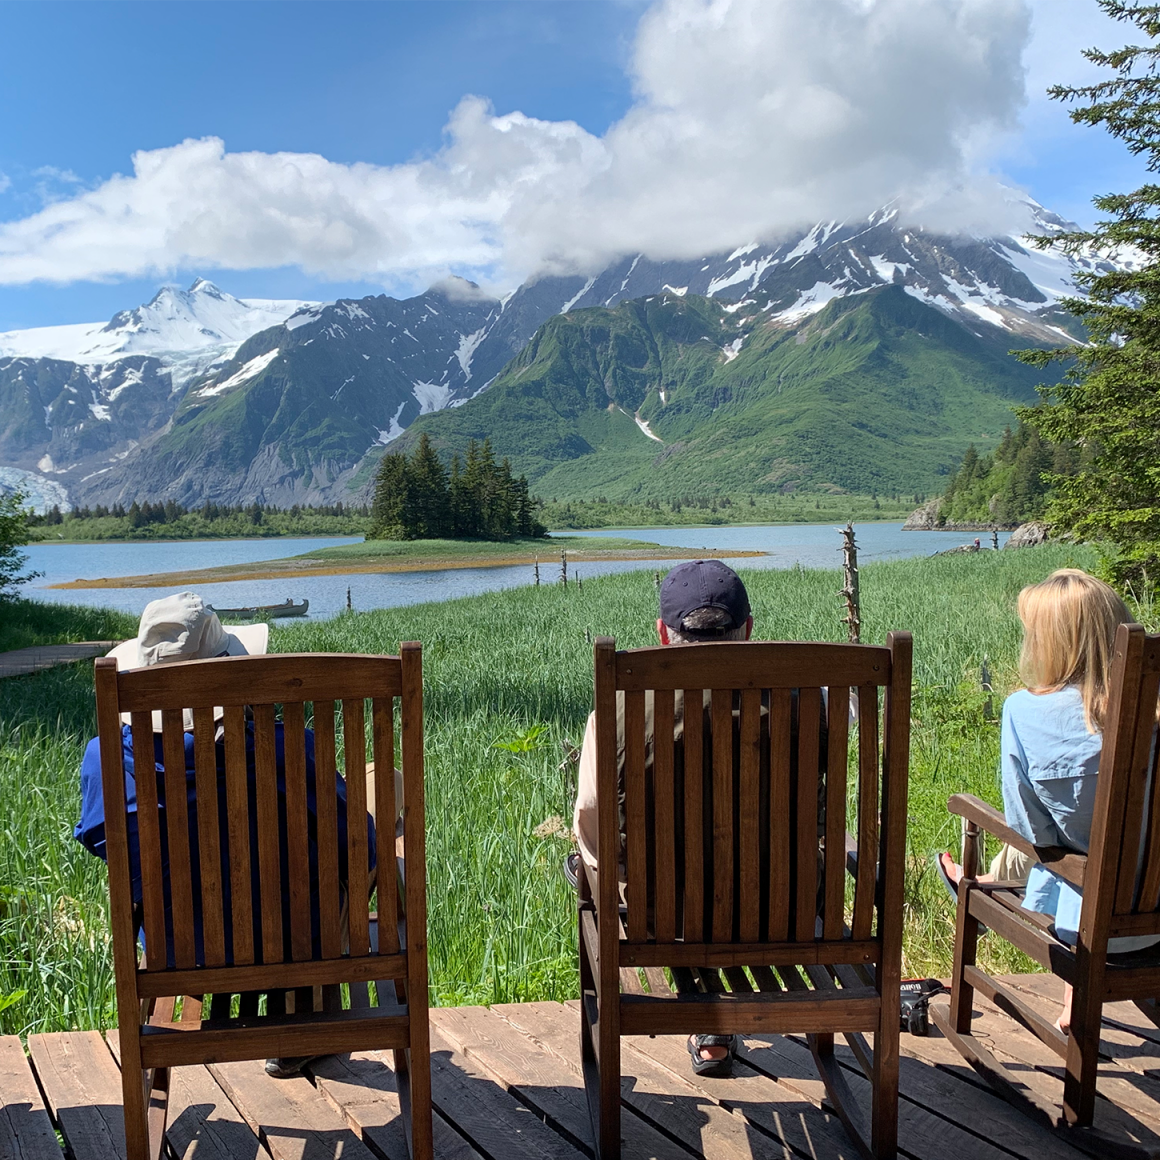 Back-view of travelers sitting in chairs enjoying view of Alaskan mountains.